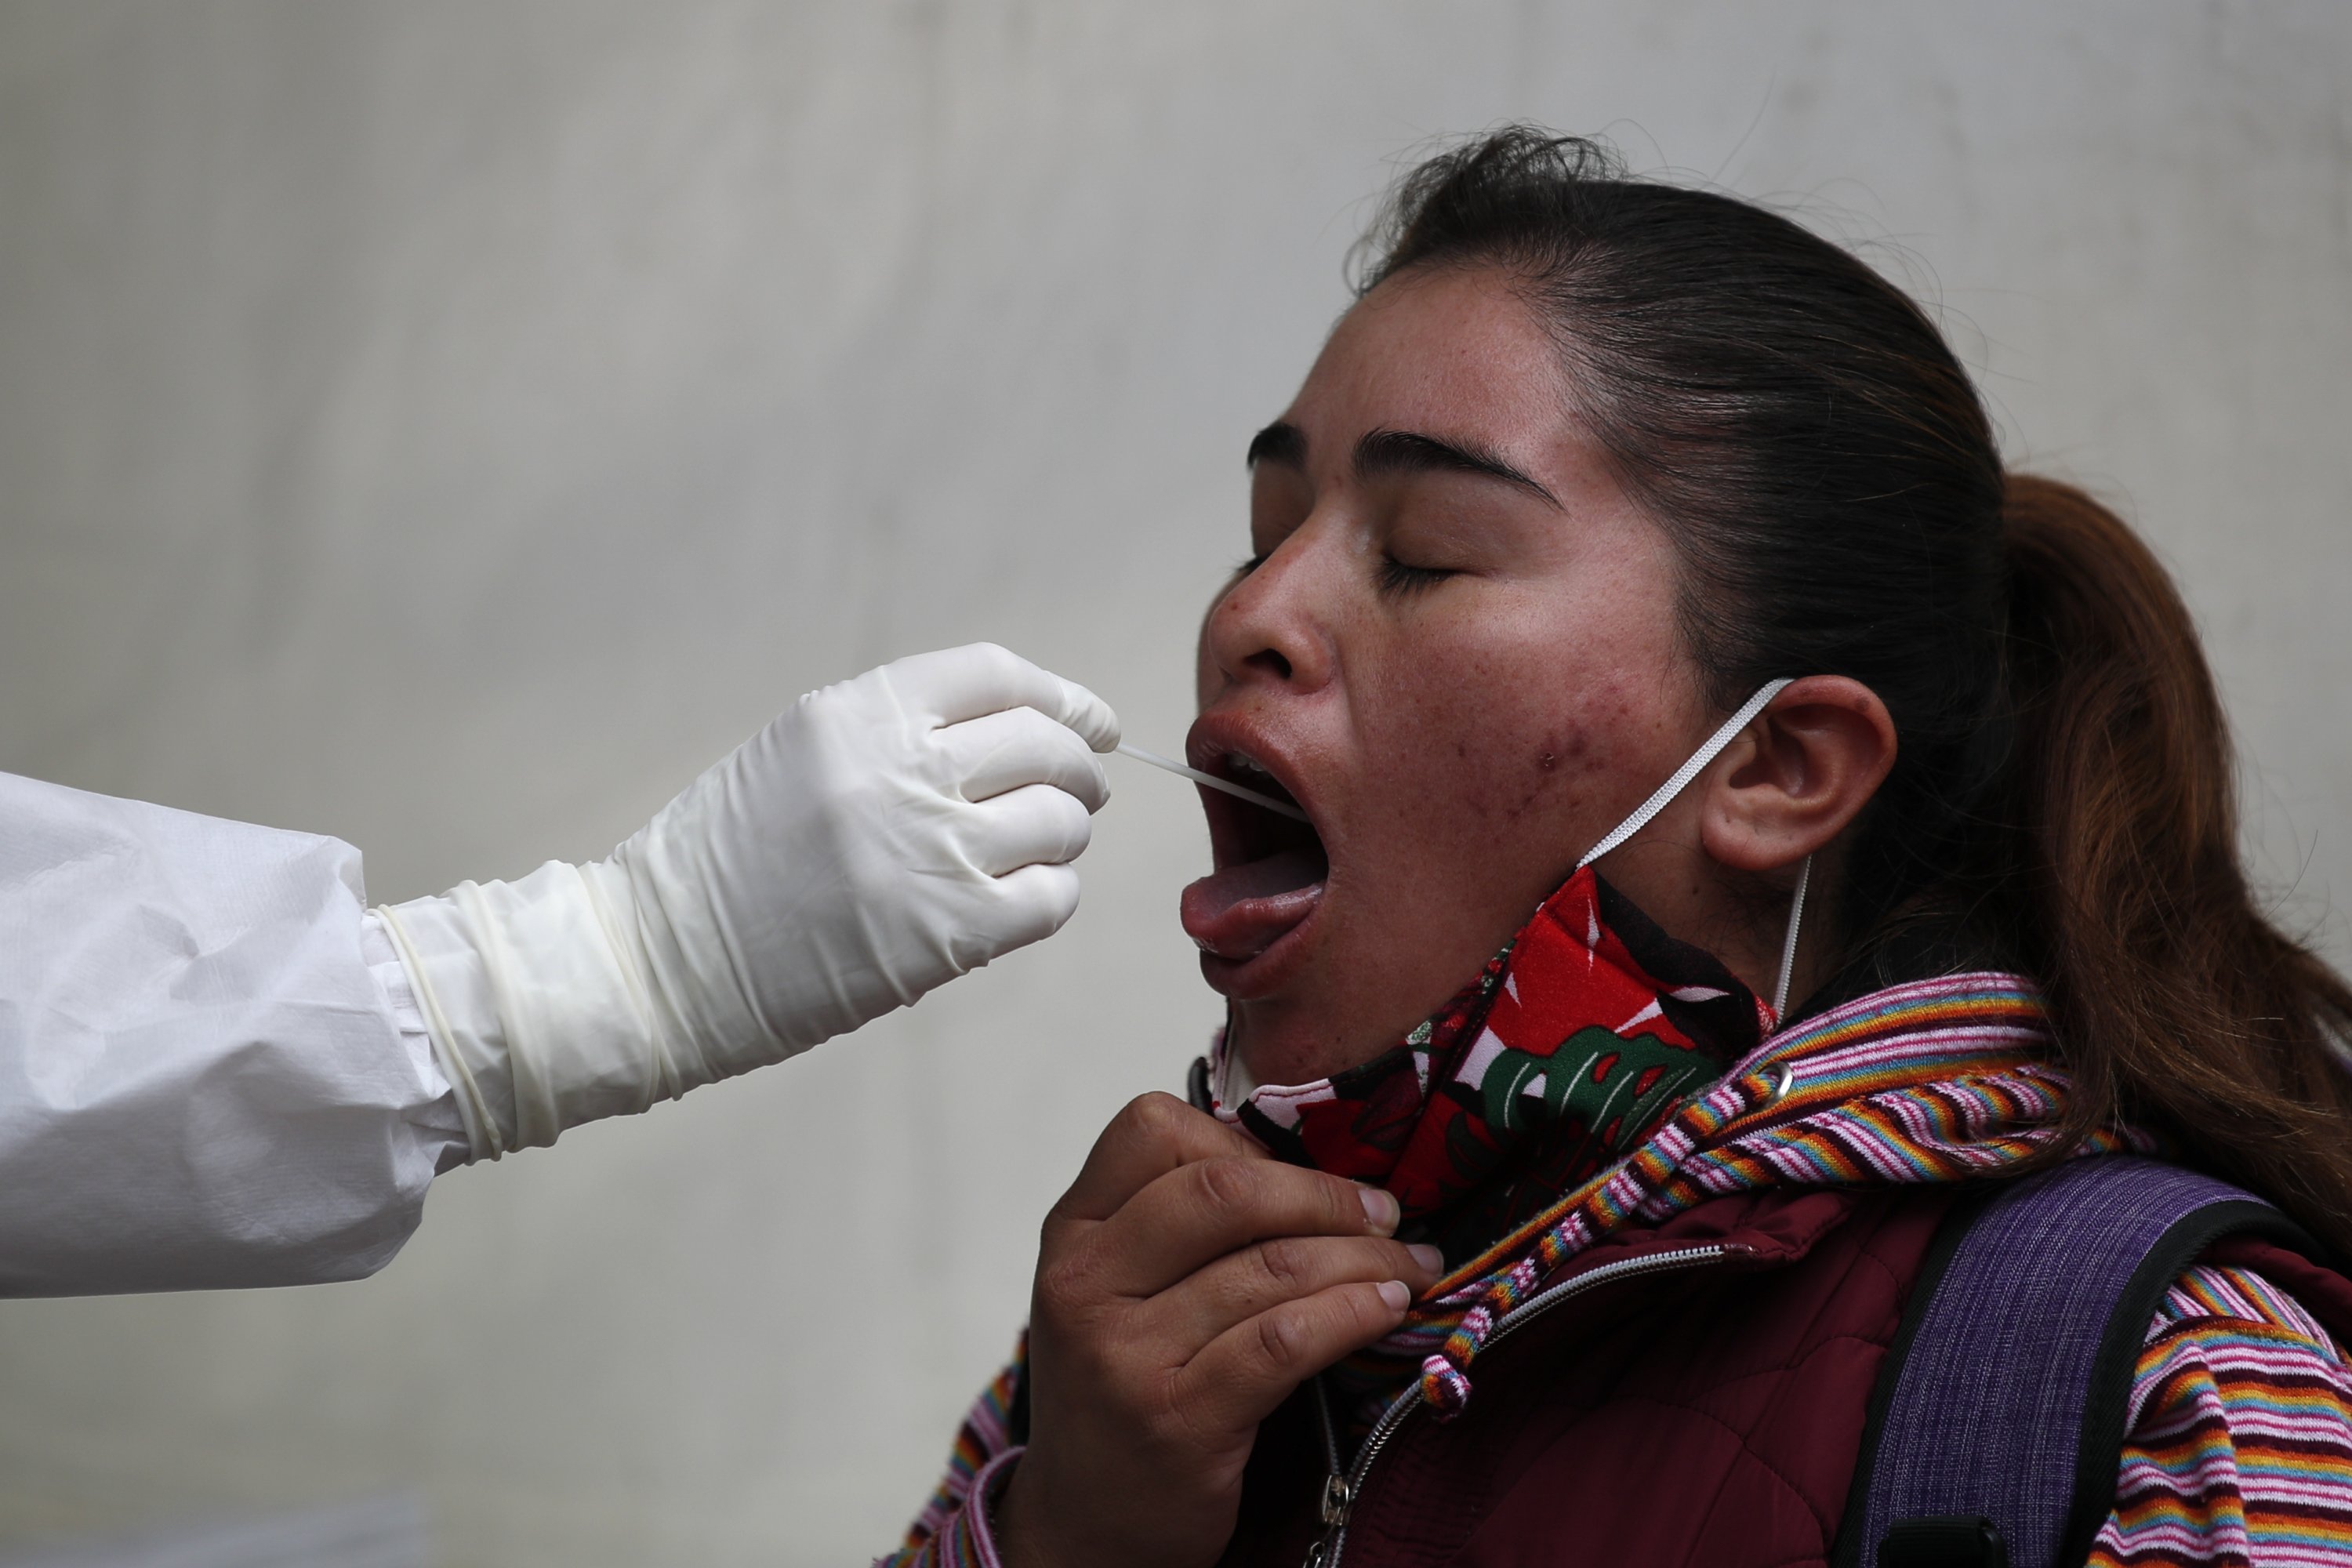 A doctor collects a throat swab for a COVID-19 test at a post set up by the city department of health to perform mainly rapid tests, outside the Pino Suarez subway station in central Mexico City, Dec. 4, 2020. (AP Photo)